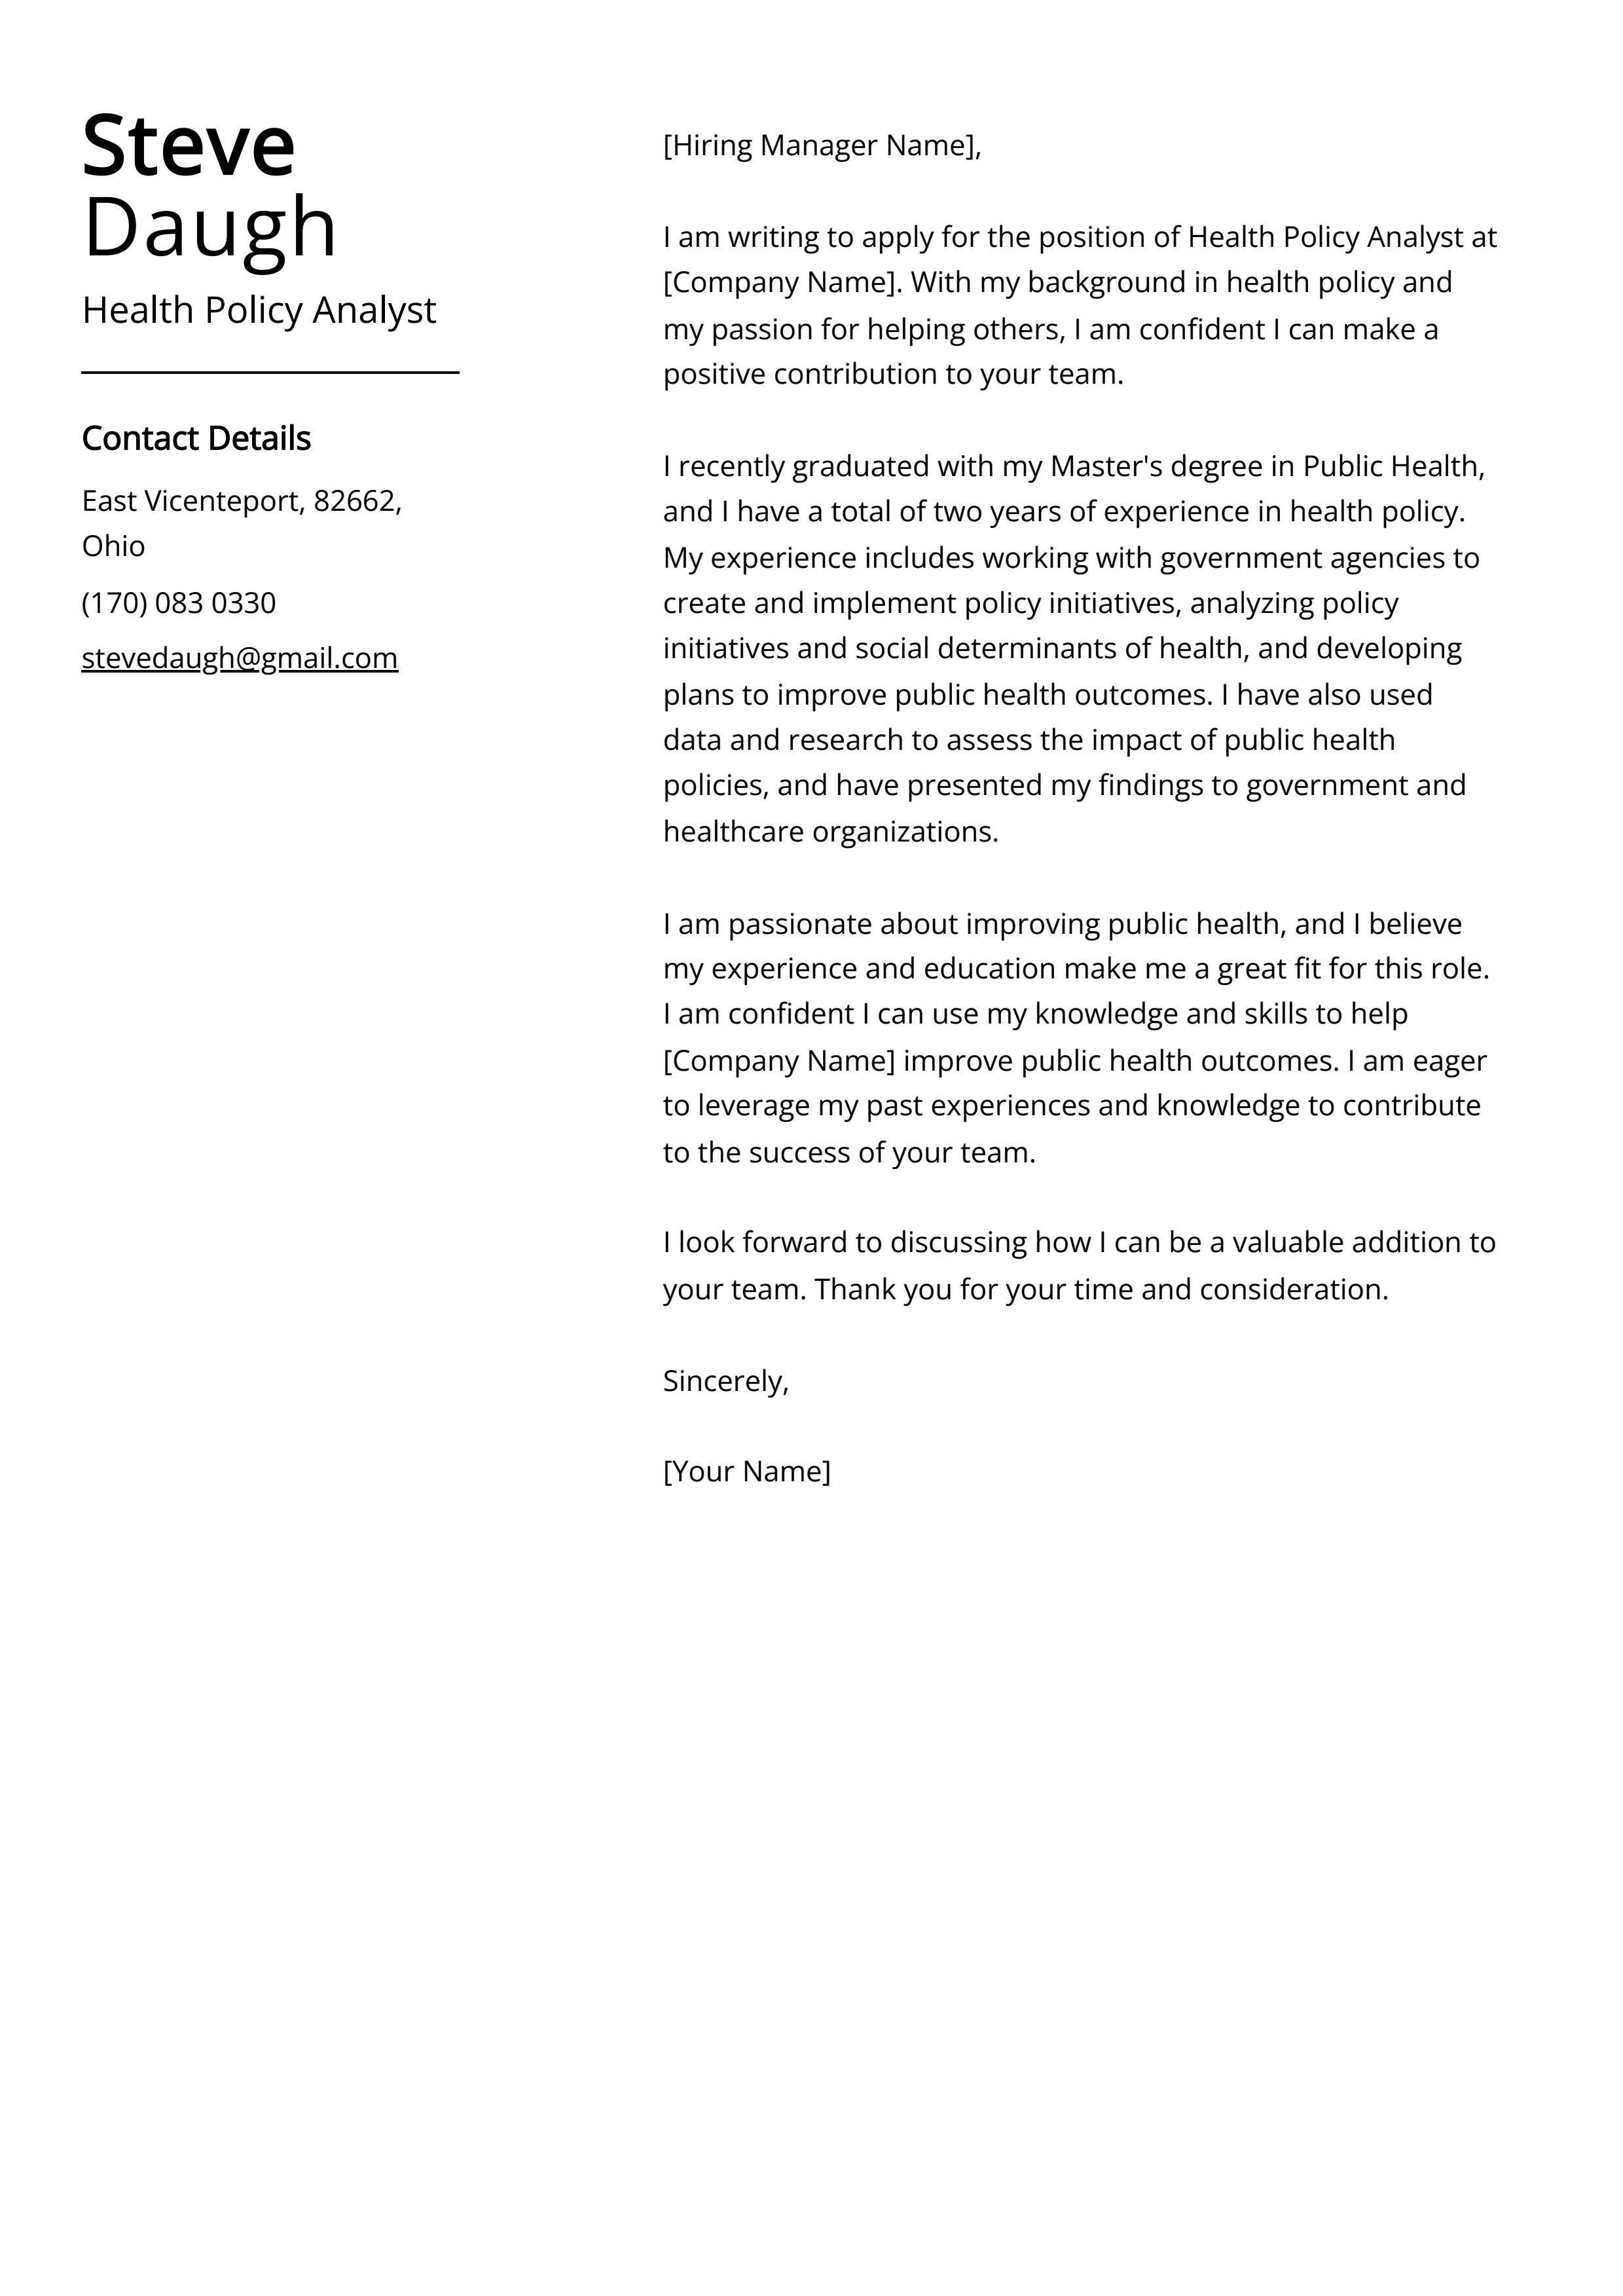 Health Policy Analyst Cover Letter Example